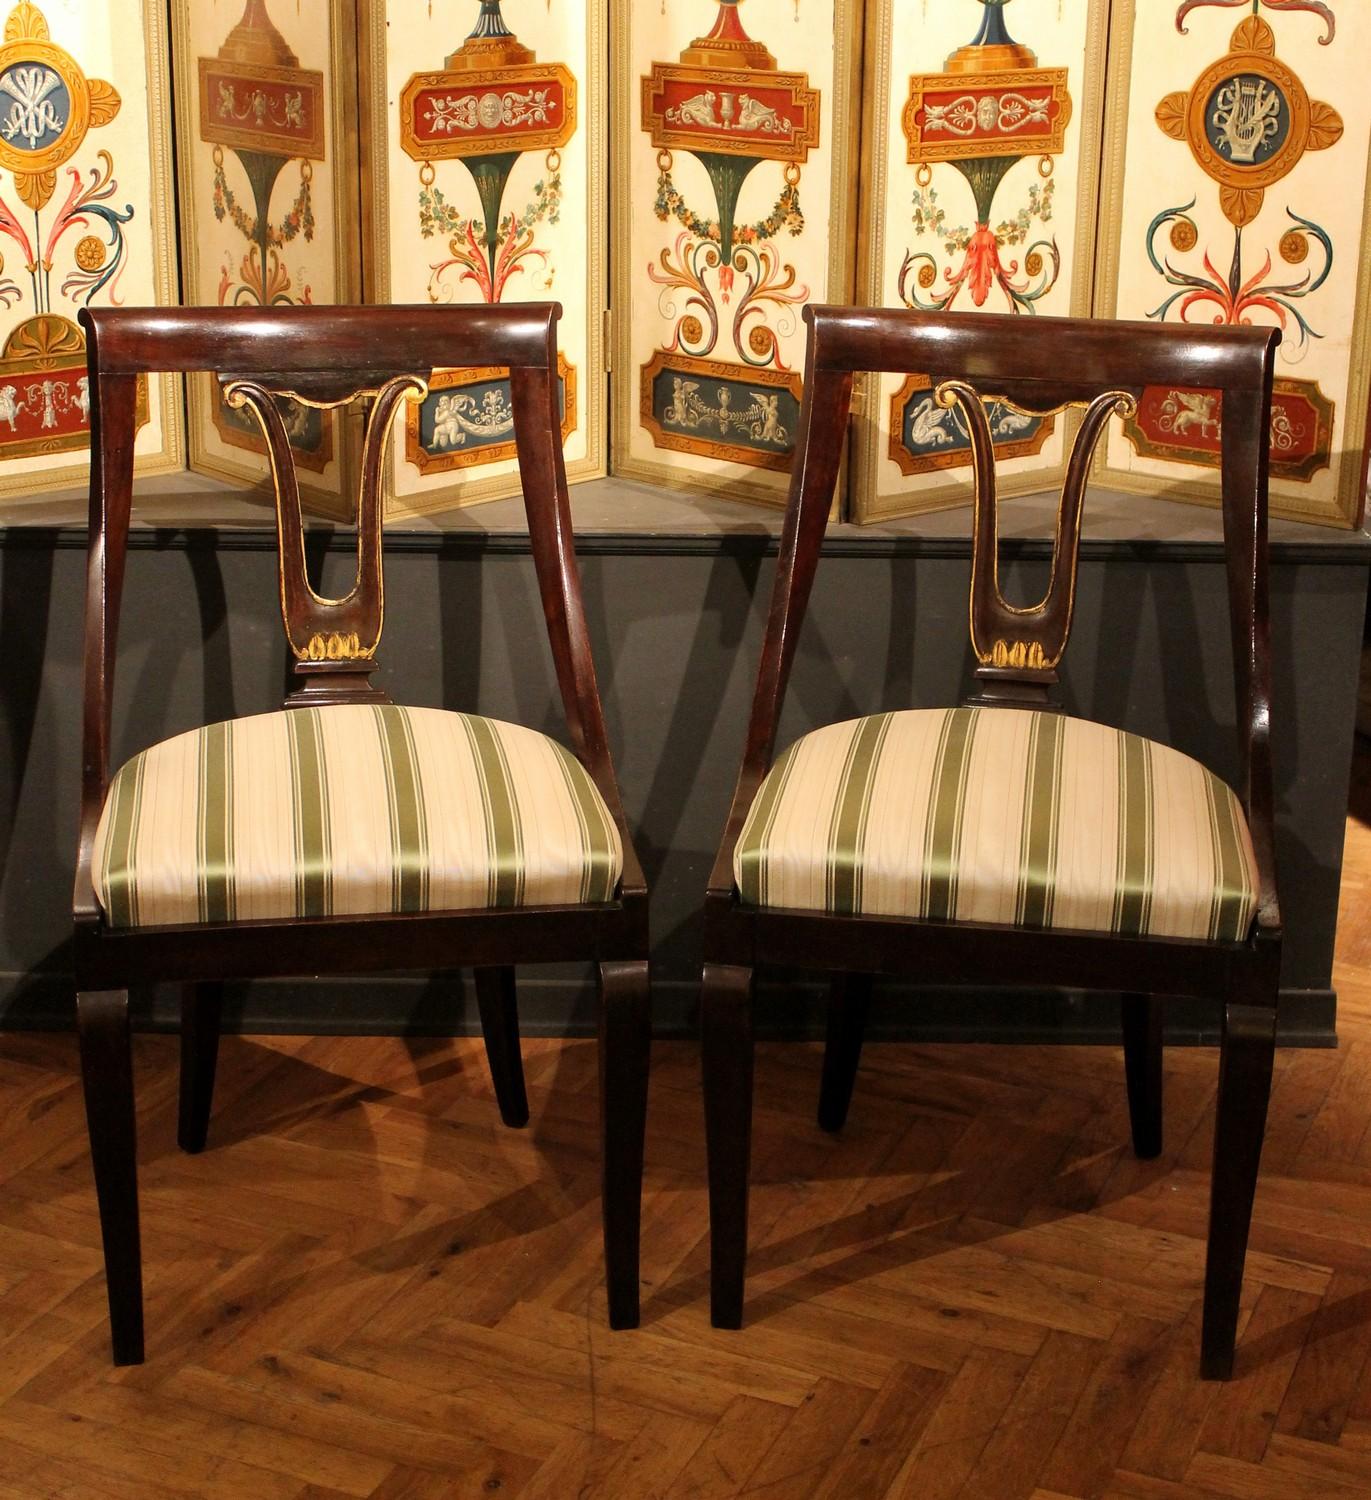 French 18th Century Directoire Mahogany Chairs with Silk Blend Upholster Fabric In Good Condition For Sale In Firenze, IT